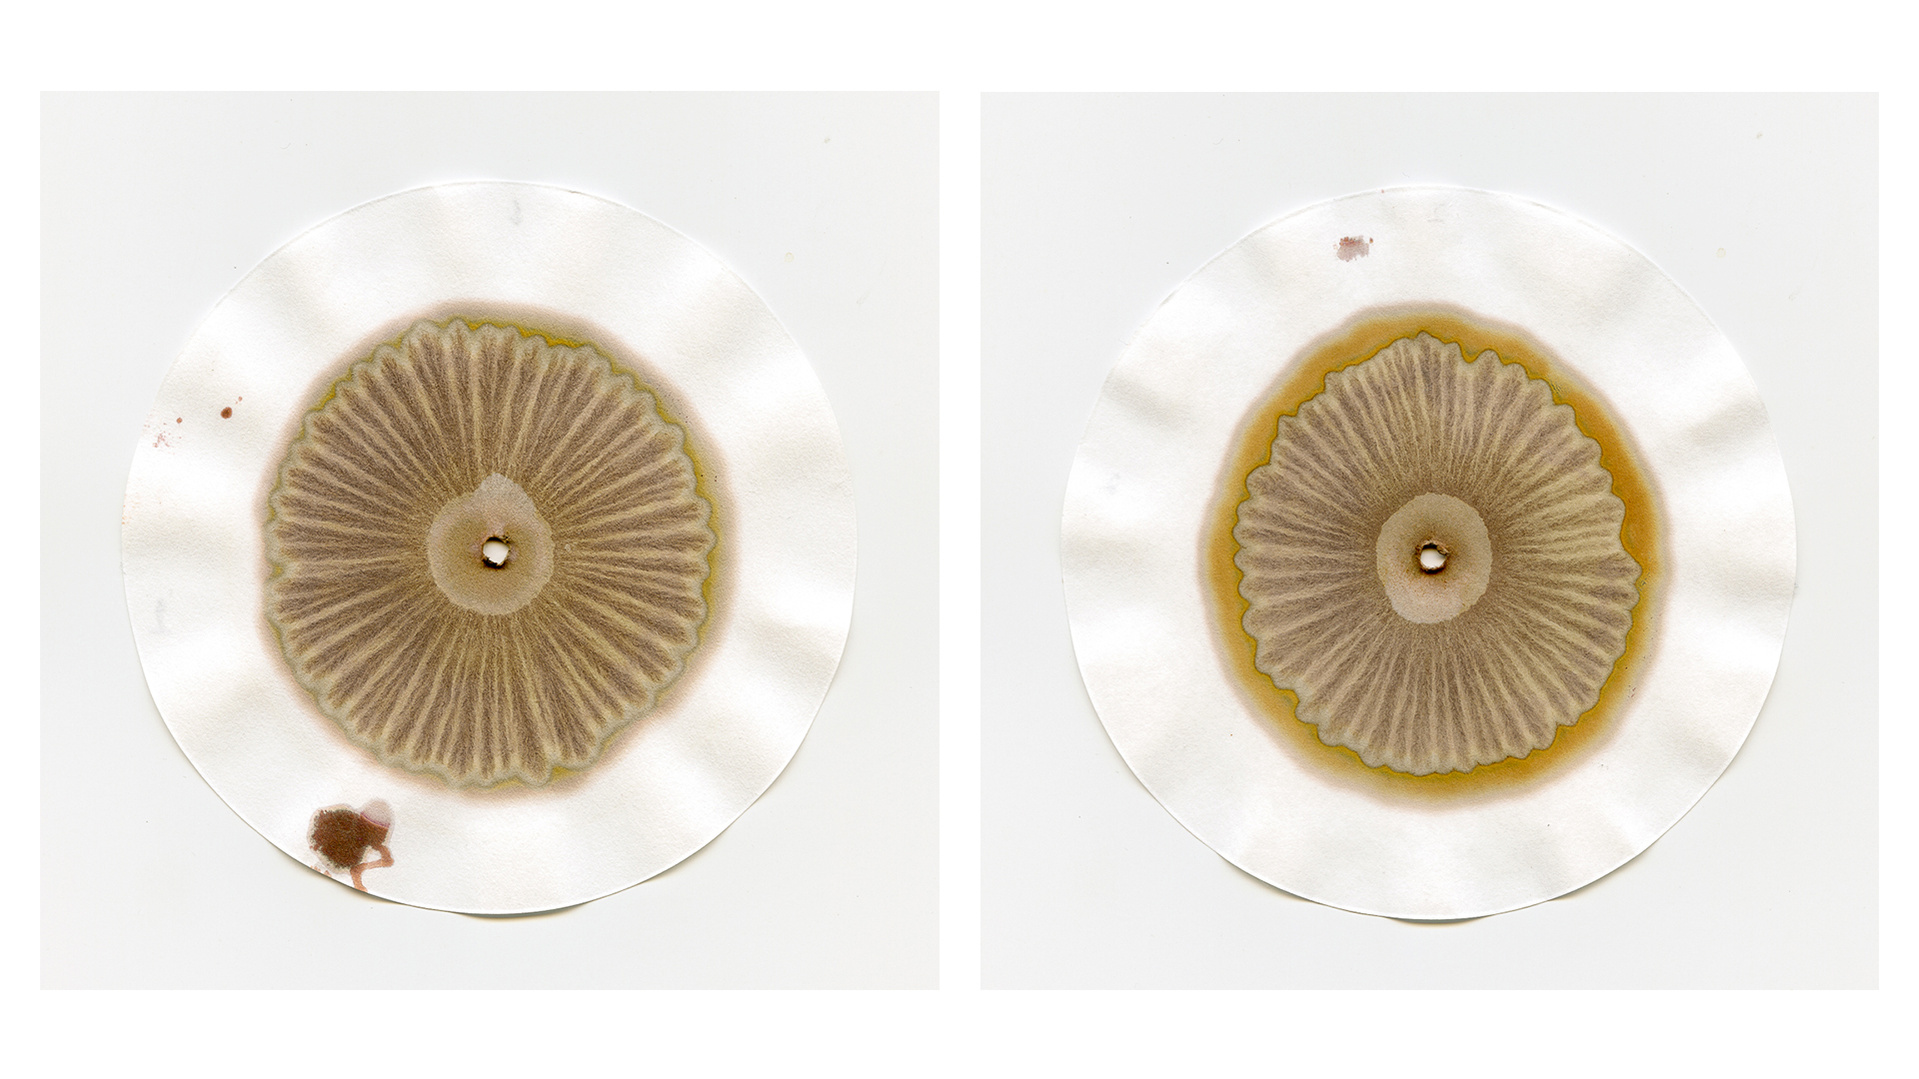 Colour photographs of two circular filter papers with radial brown, orange and yellow patterns emanating from a central hole where a wick had been placed to absorb soil matter dissolved in sodium hydroxide solution to the filter paper.